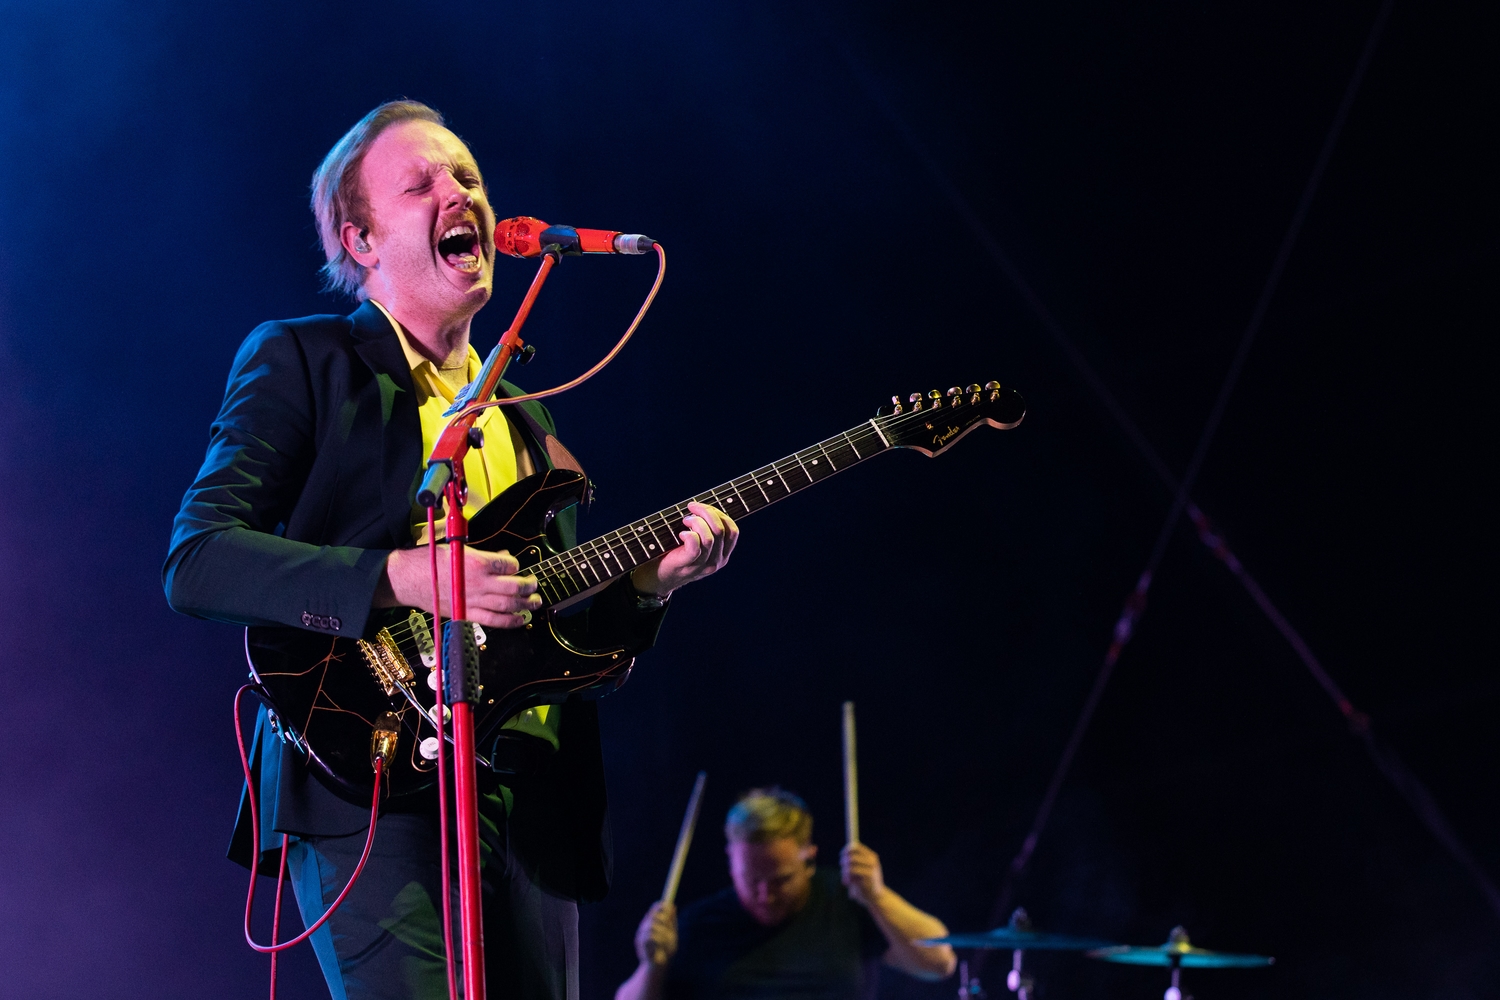 Two Door Cinema Club will play Margate’s Summer Series this year